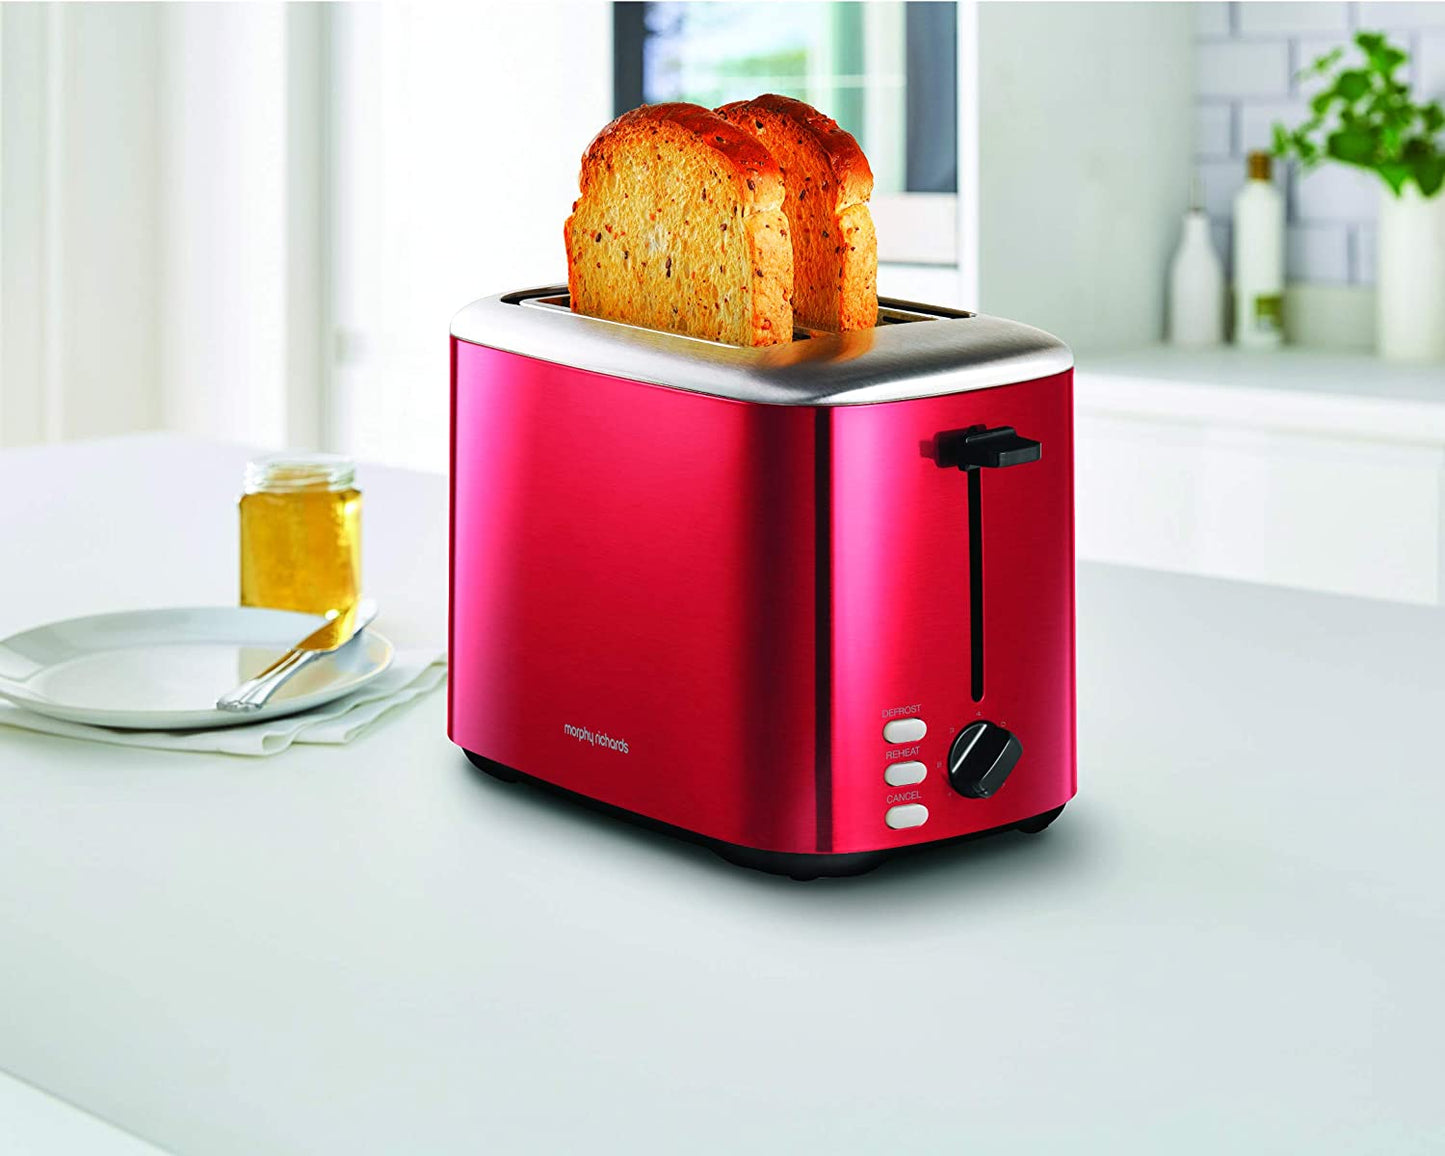 Morphy Richards 222066 Equip 2 Slice Toaster 800W Red